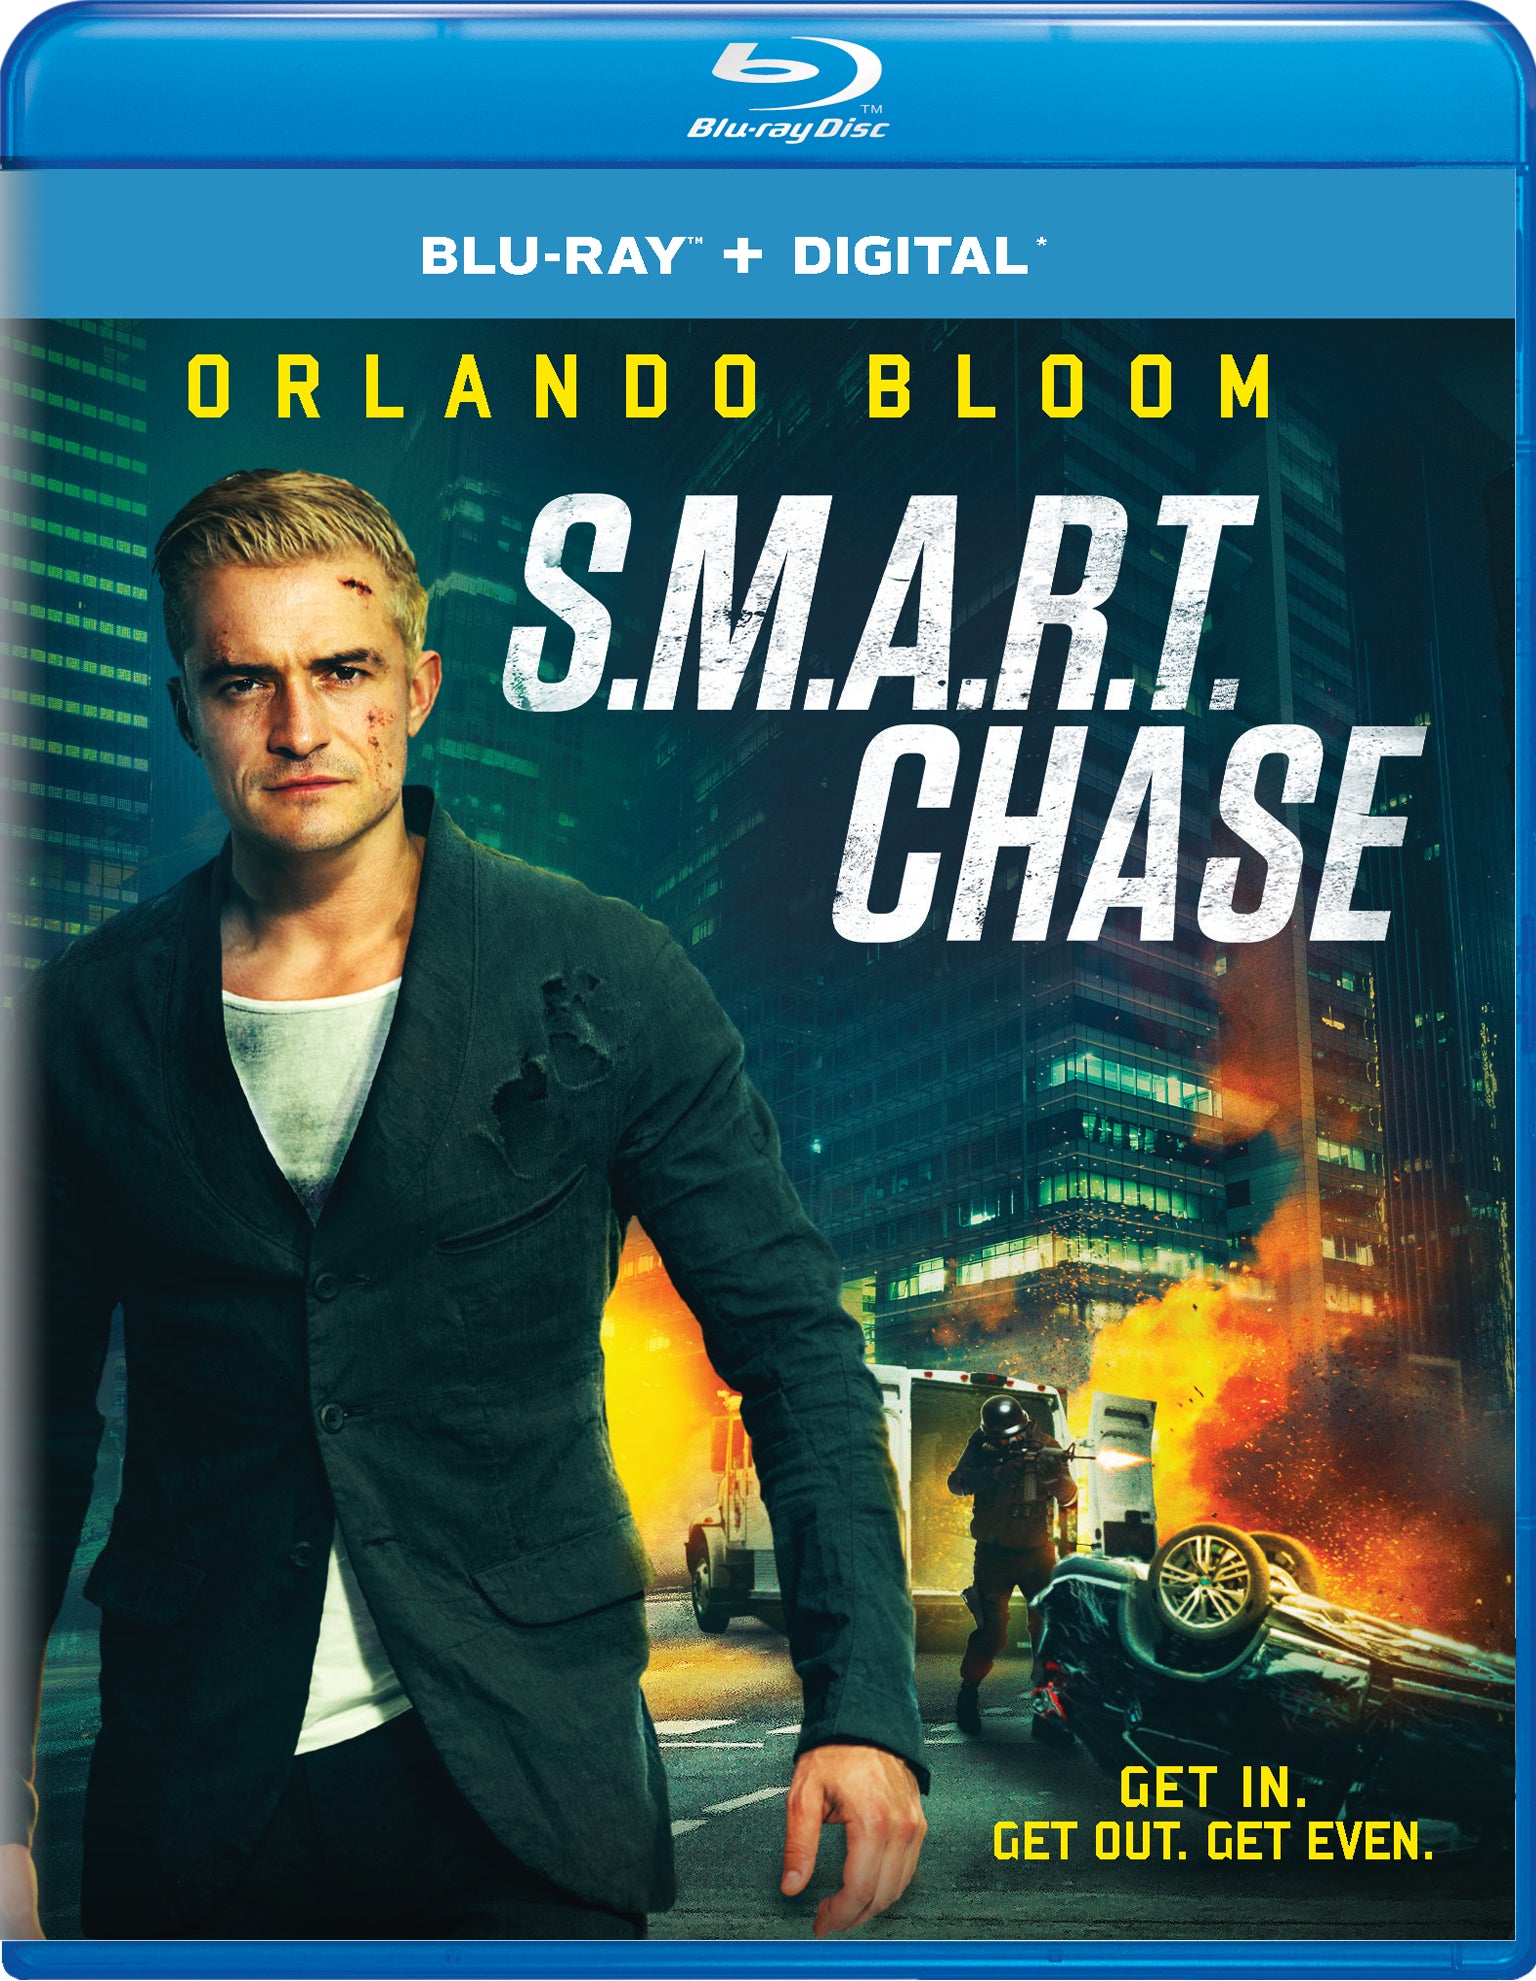 S.M.A.R.T. Chase cover art